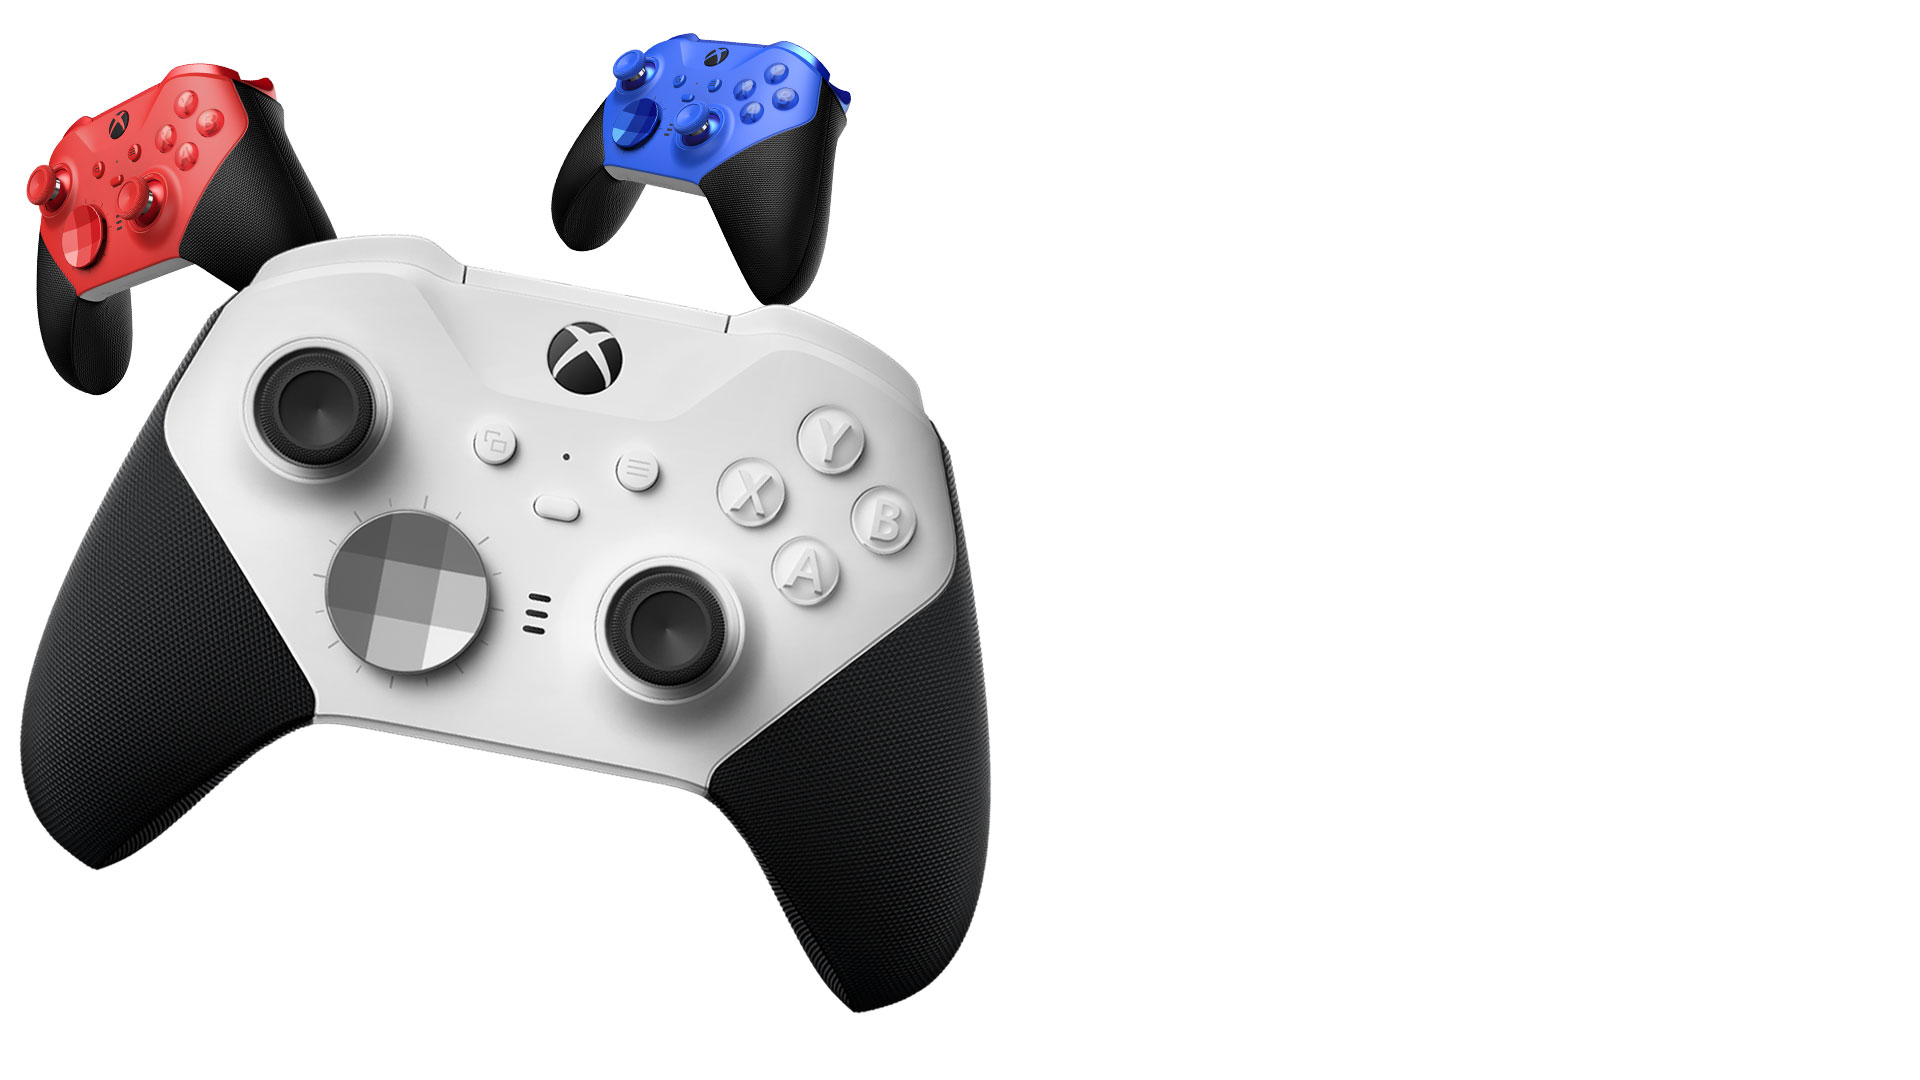 Xbox Elite series 2 core white, blue, and red controller